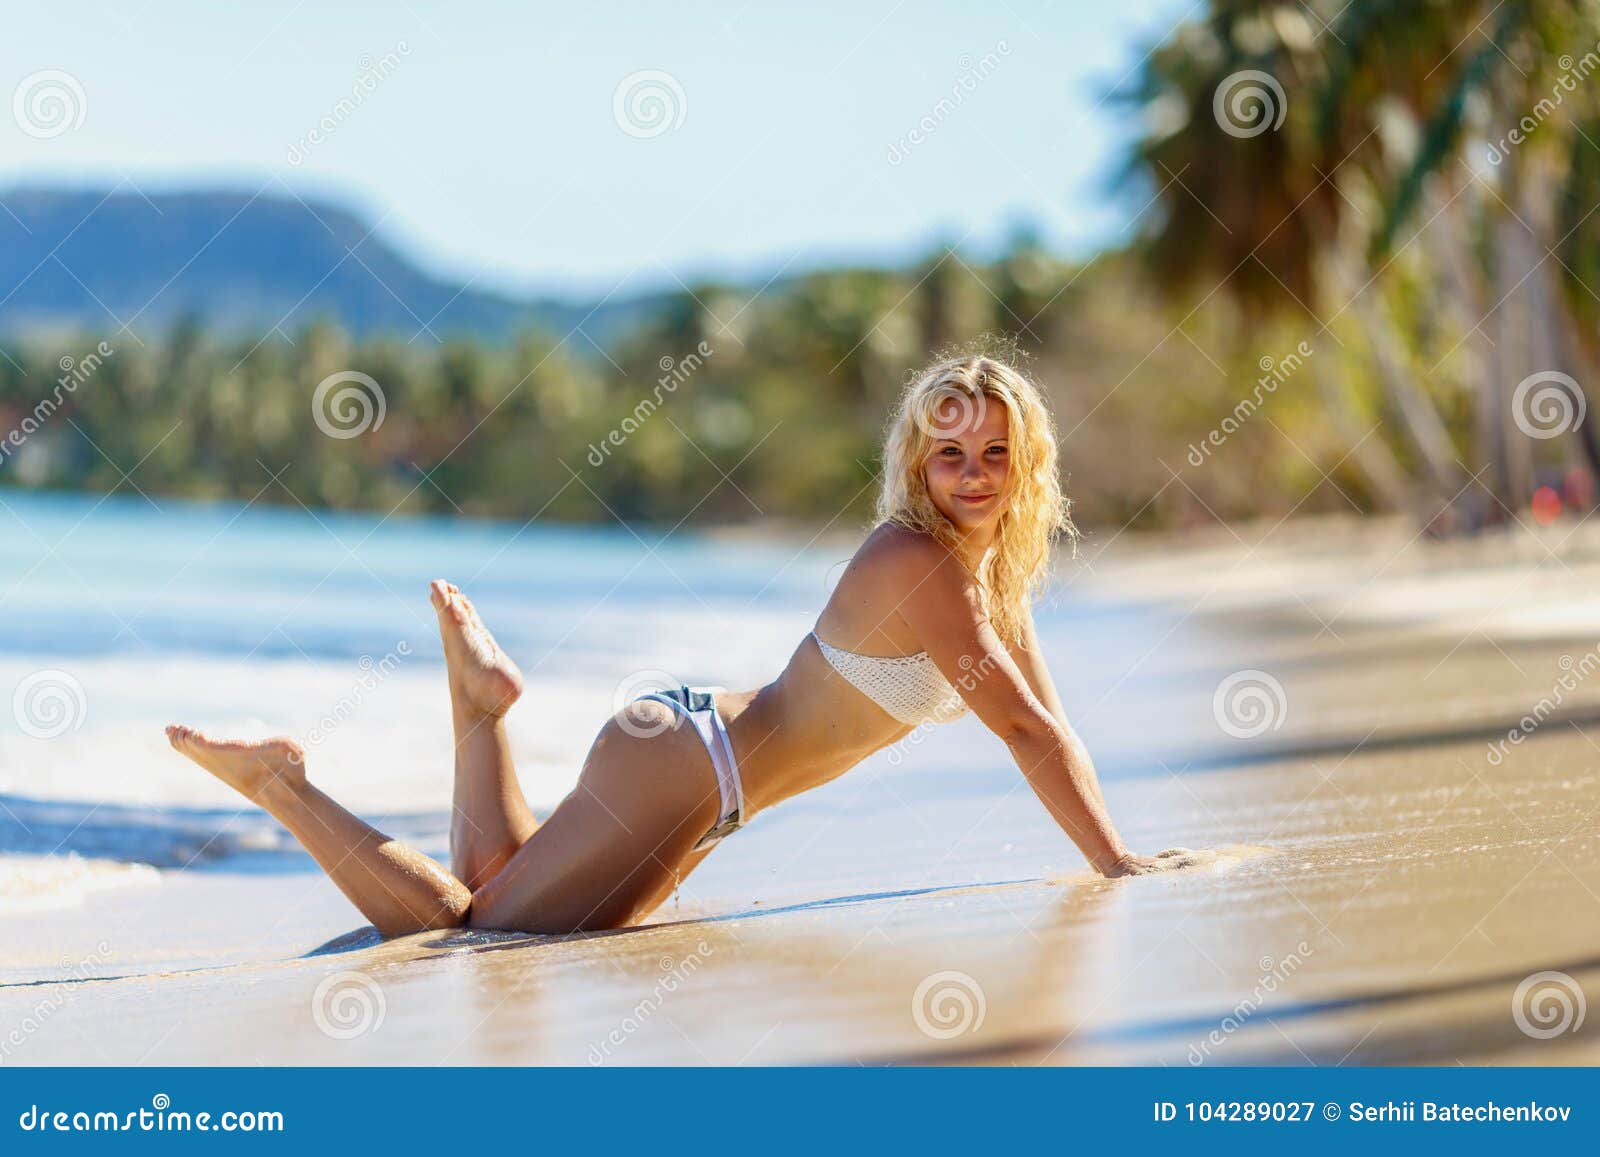 beach naked pictures of amateur blonde